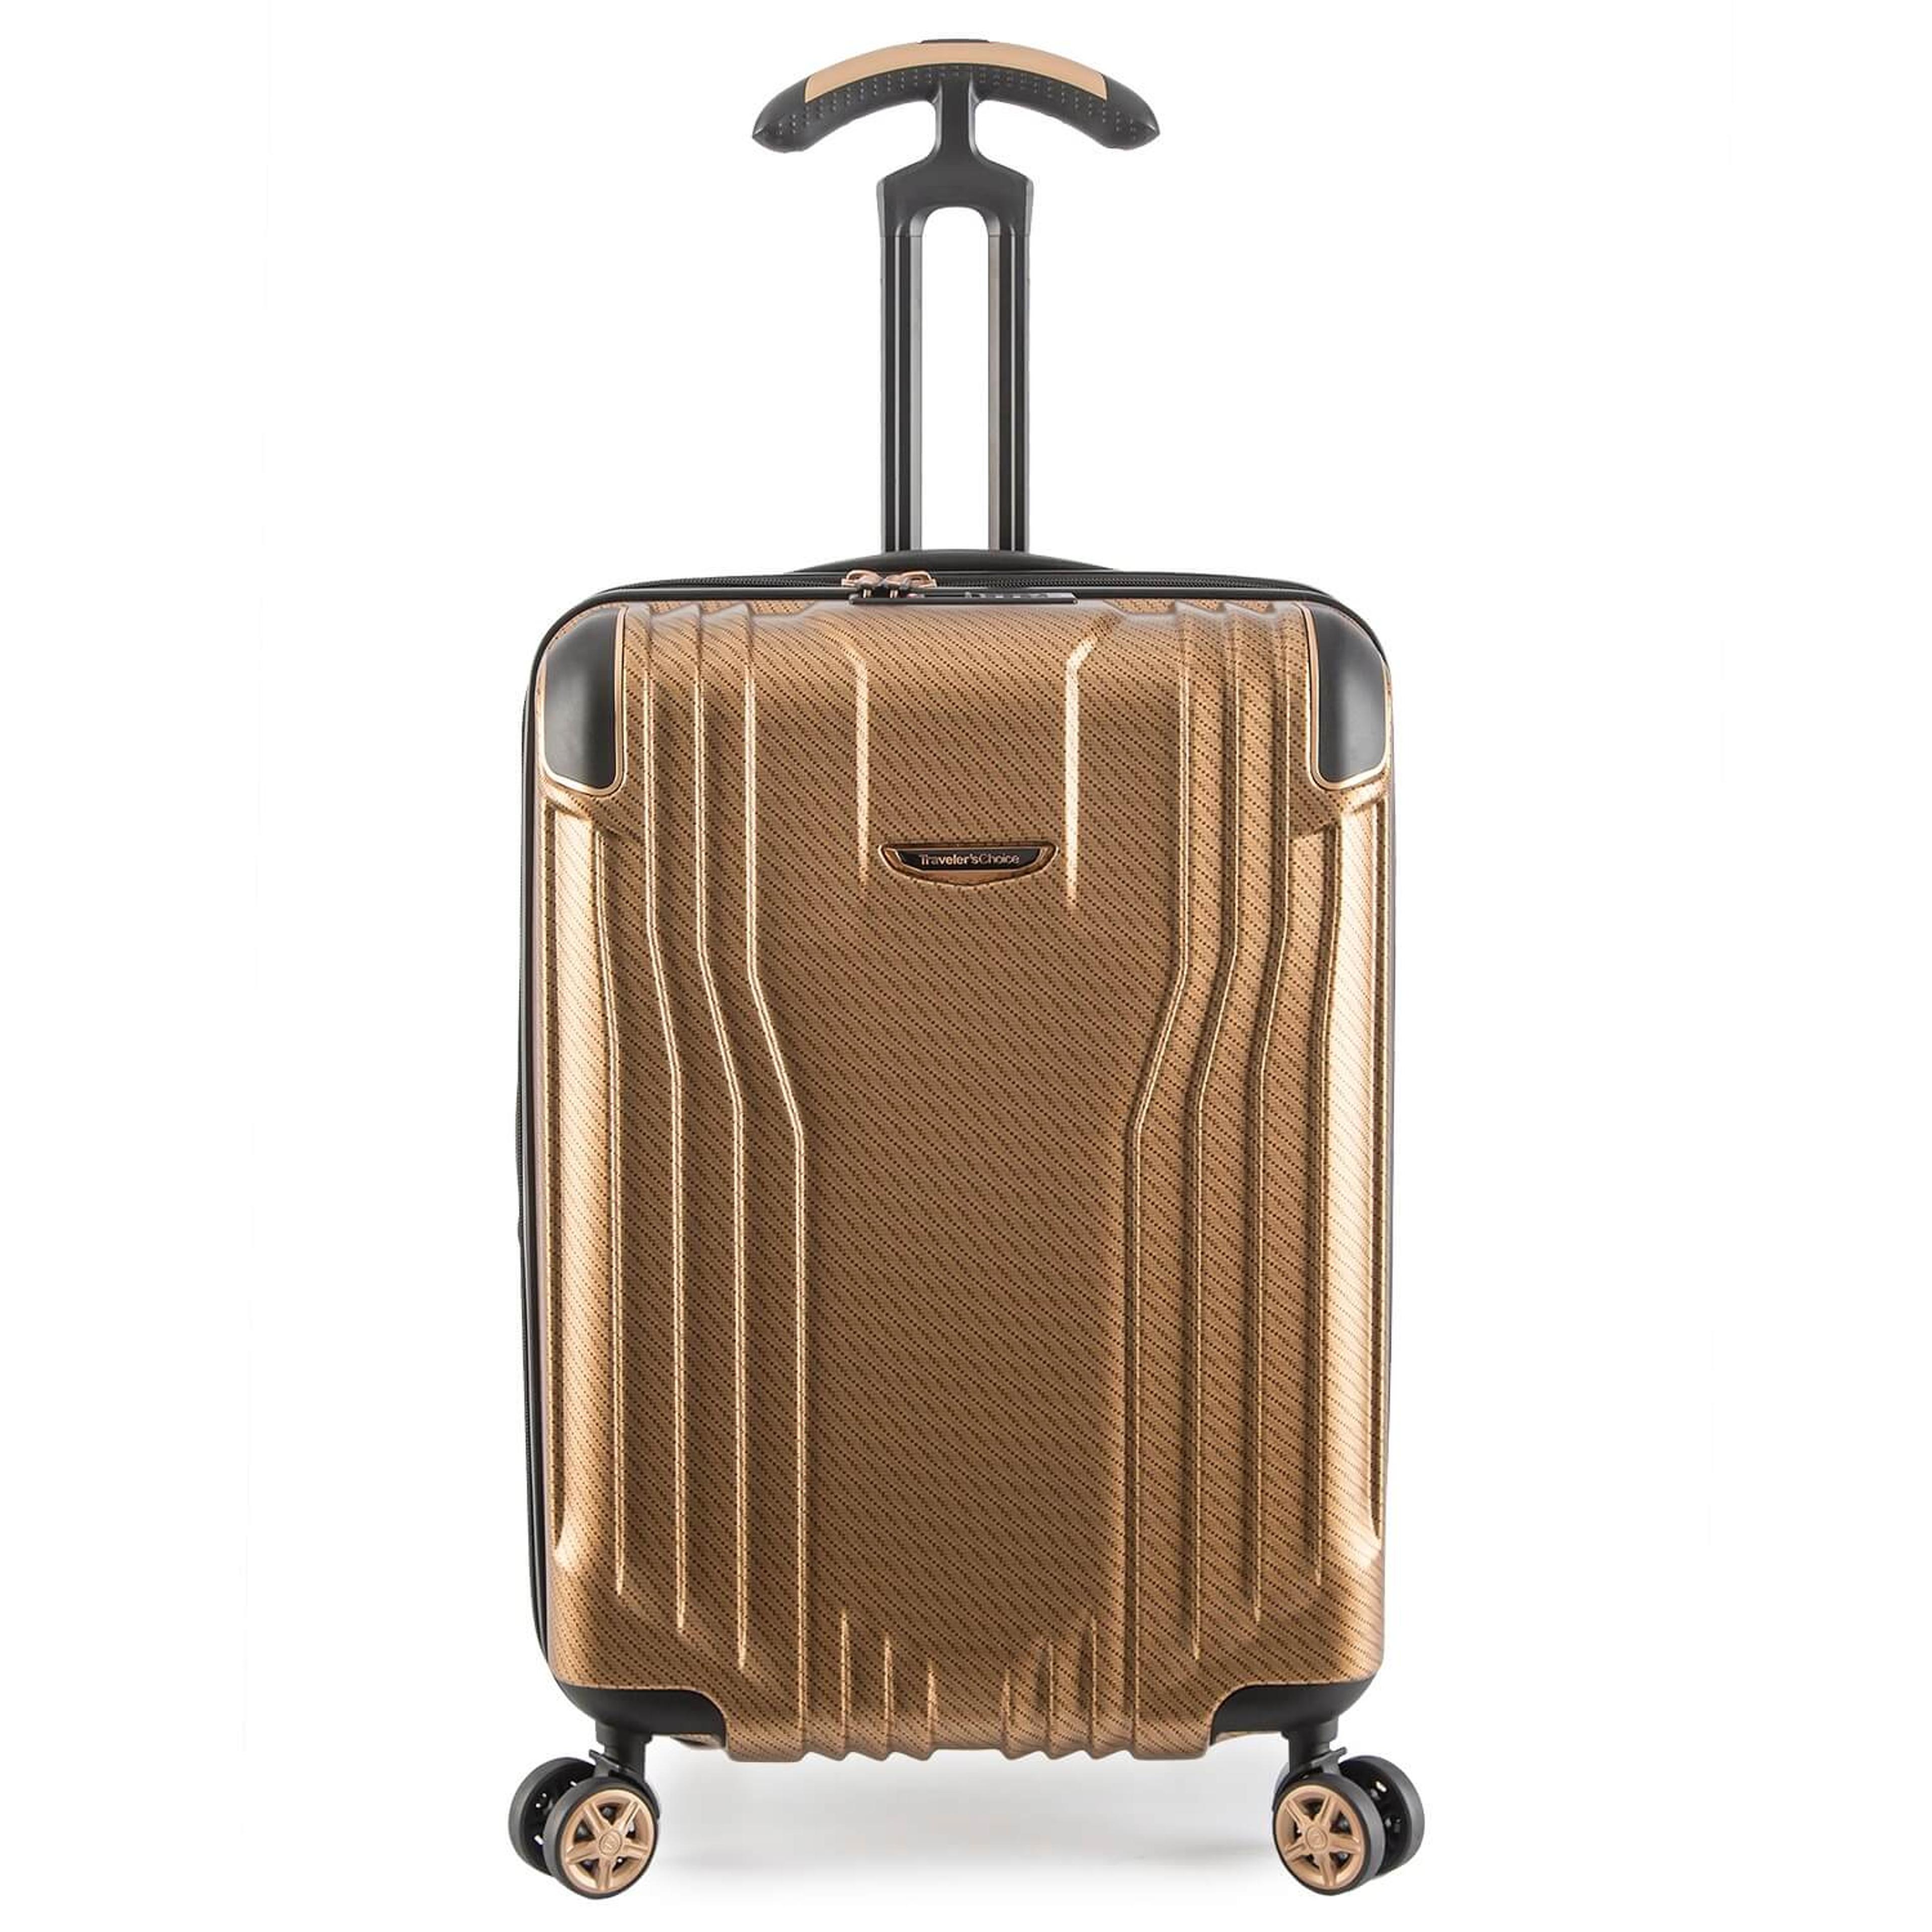 Continent Adventurer Carry-On Spinner Luggage w/ USB Port – Traveler's Choice